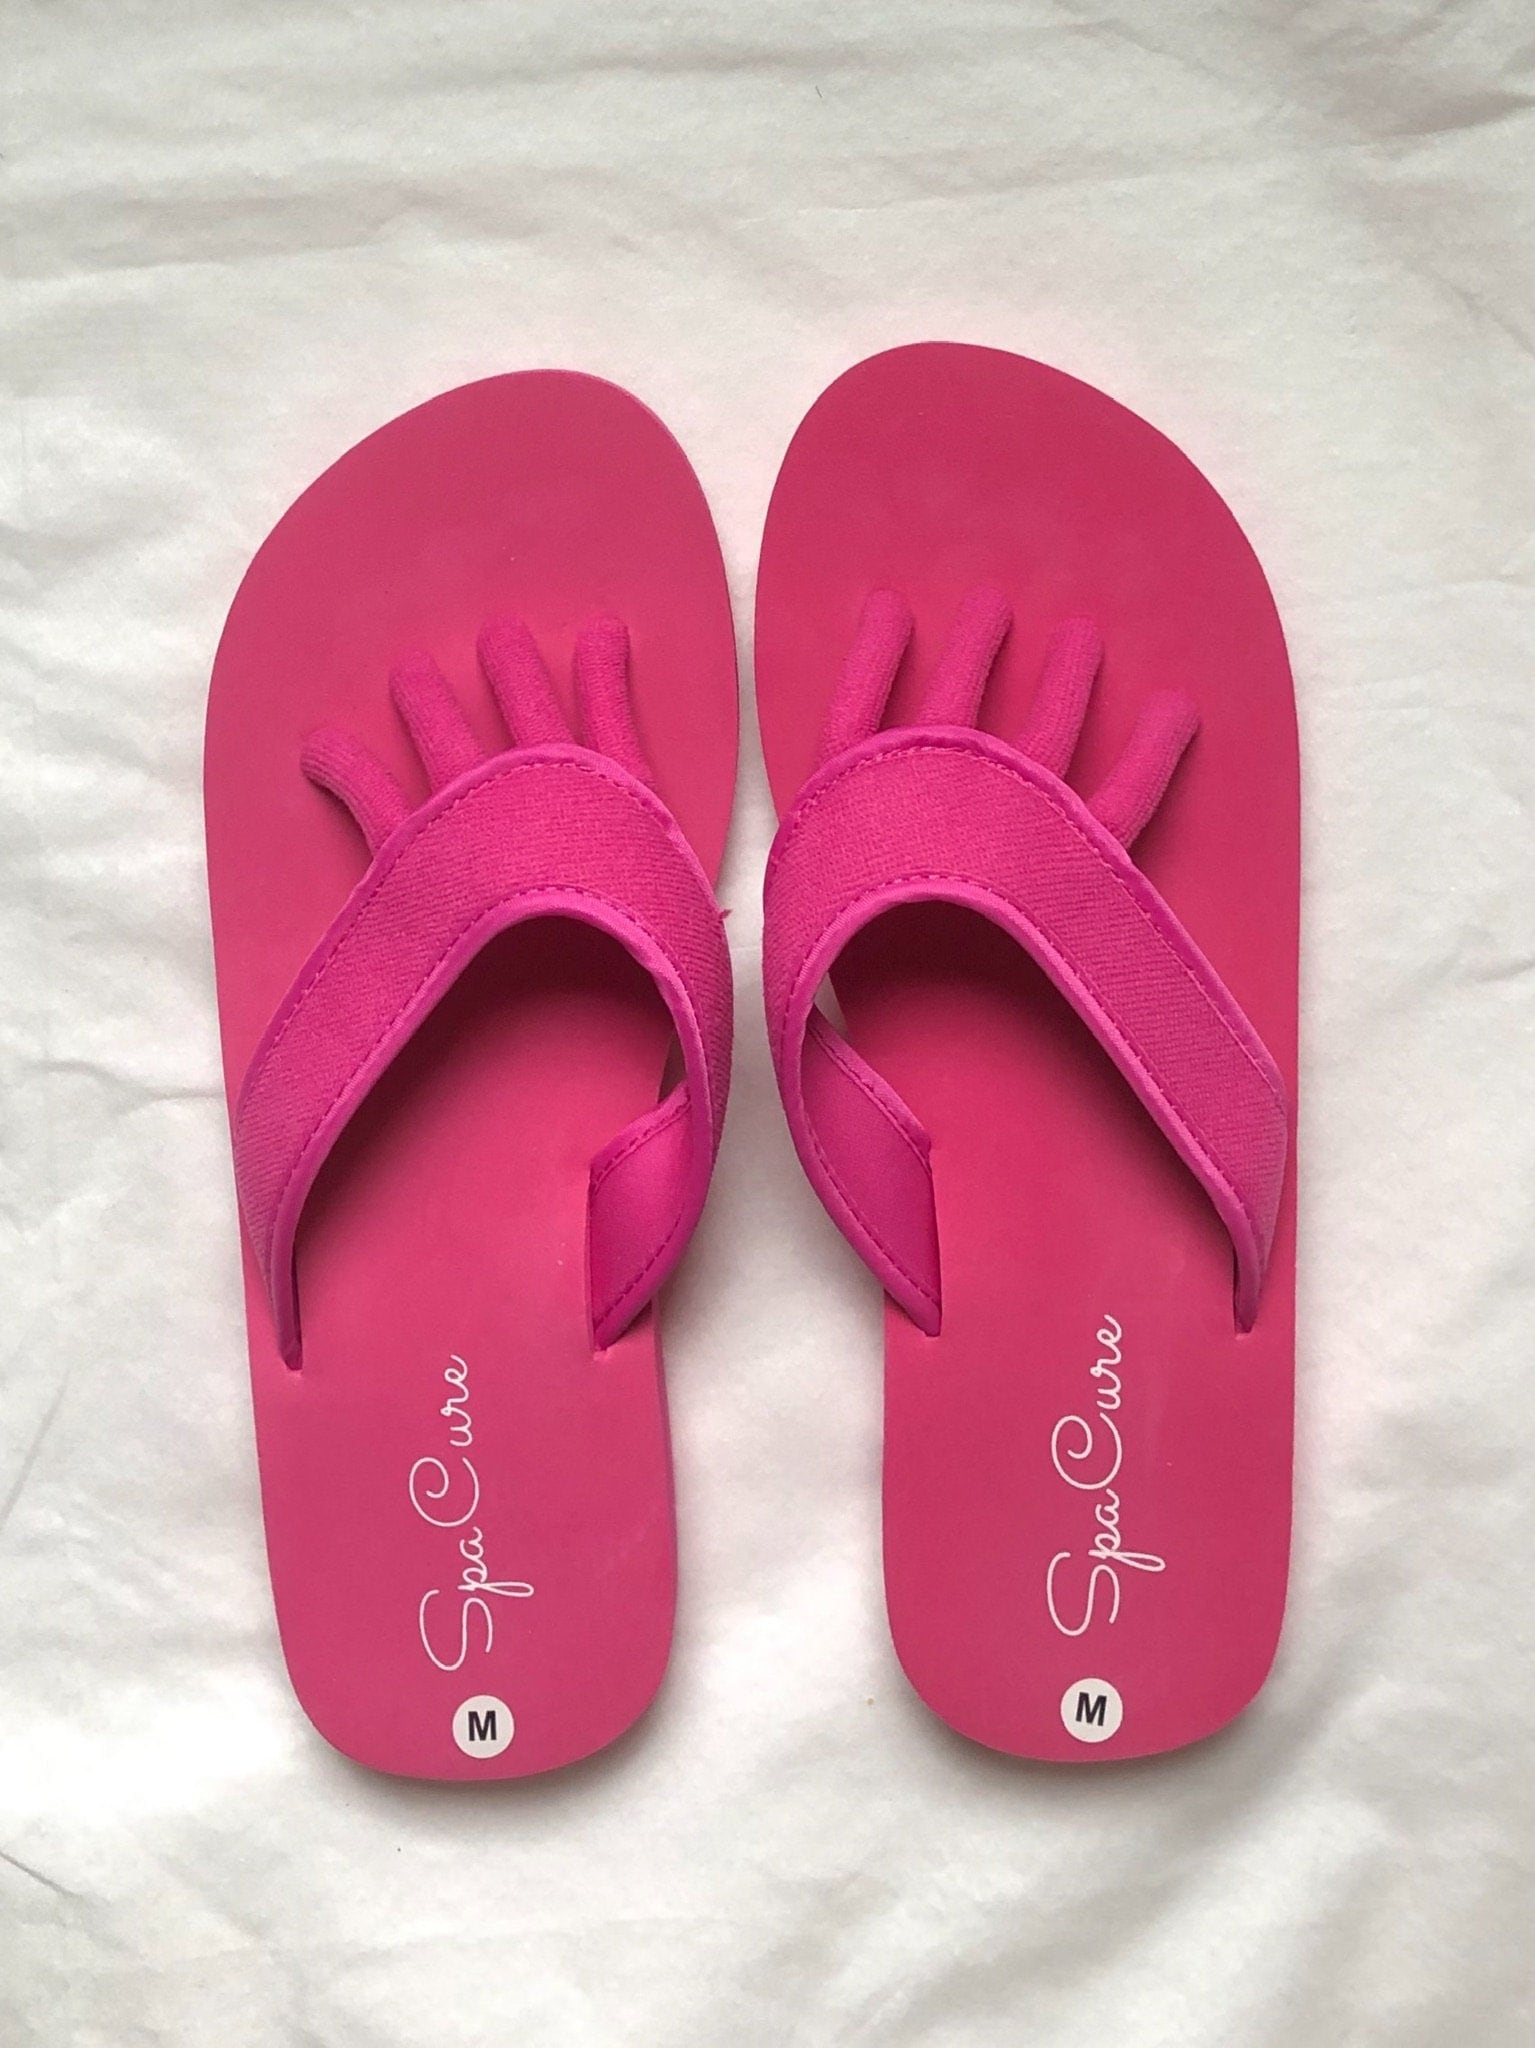 Plush lined non-slip spa slippers - Pink. Colour: pink. Size: s